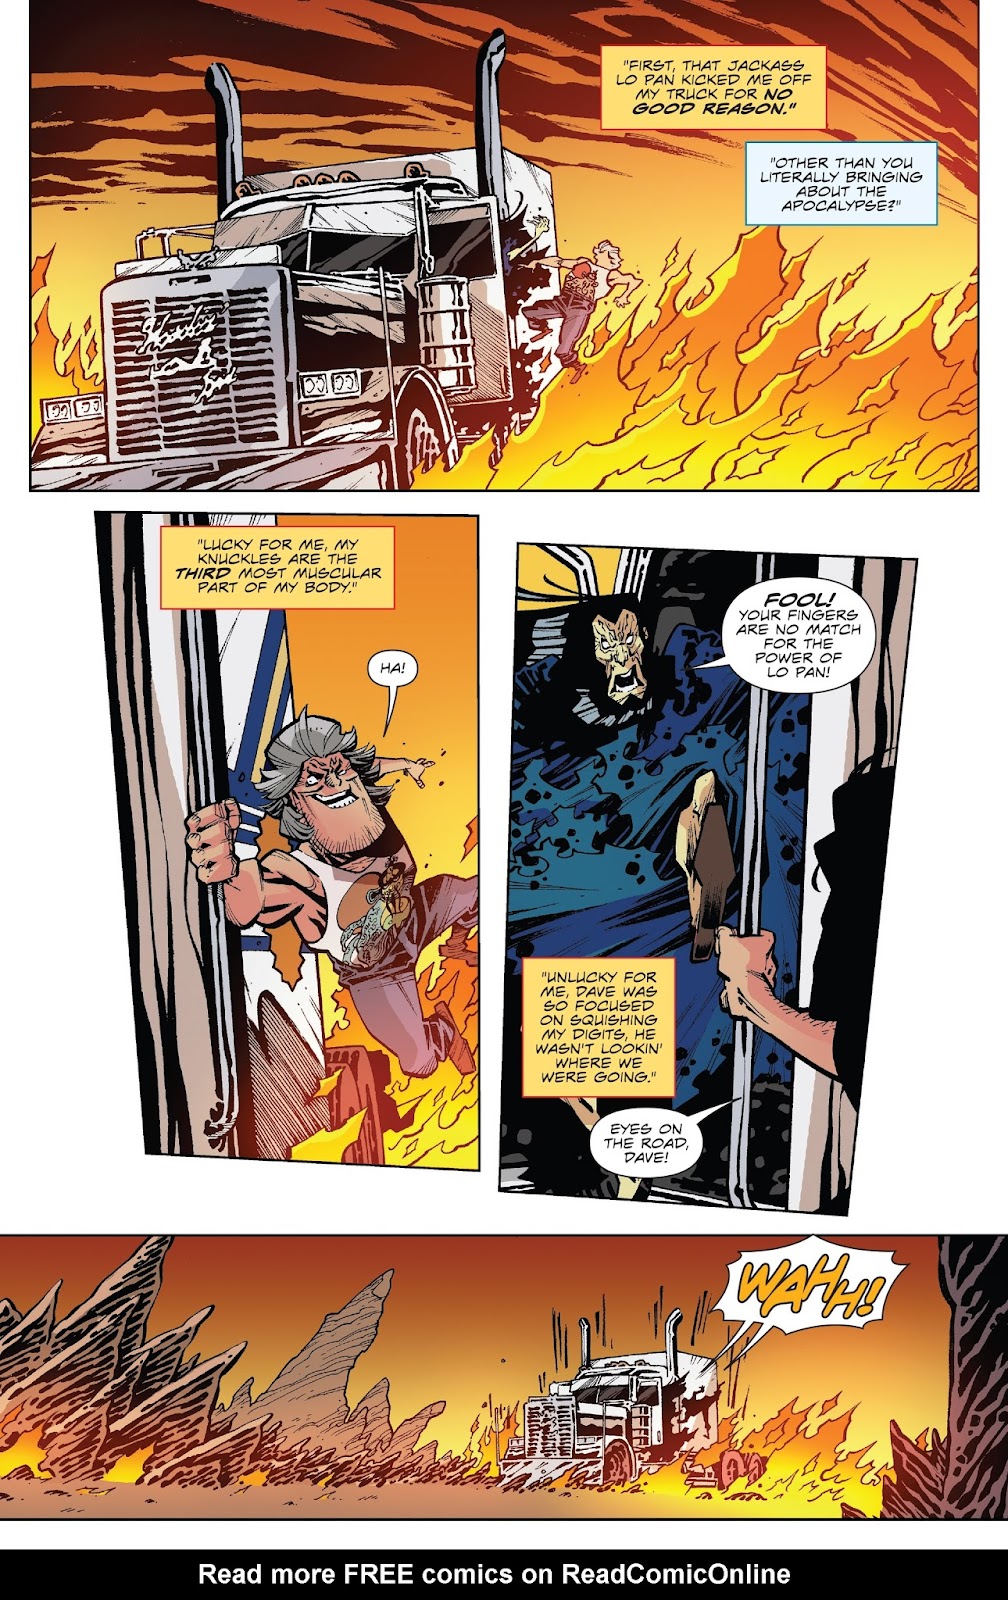 Big Trouble in Little China: Old Man Jack issue 4 - Page 4